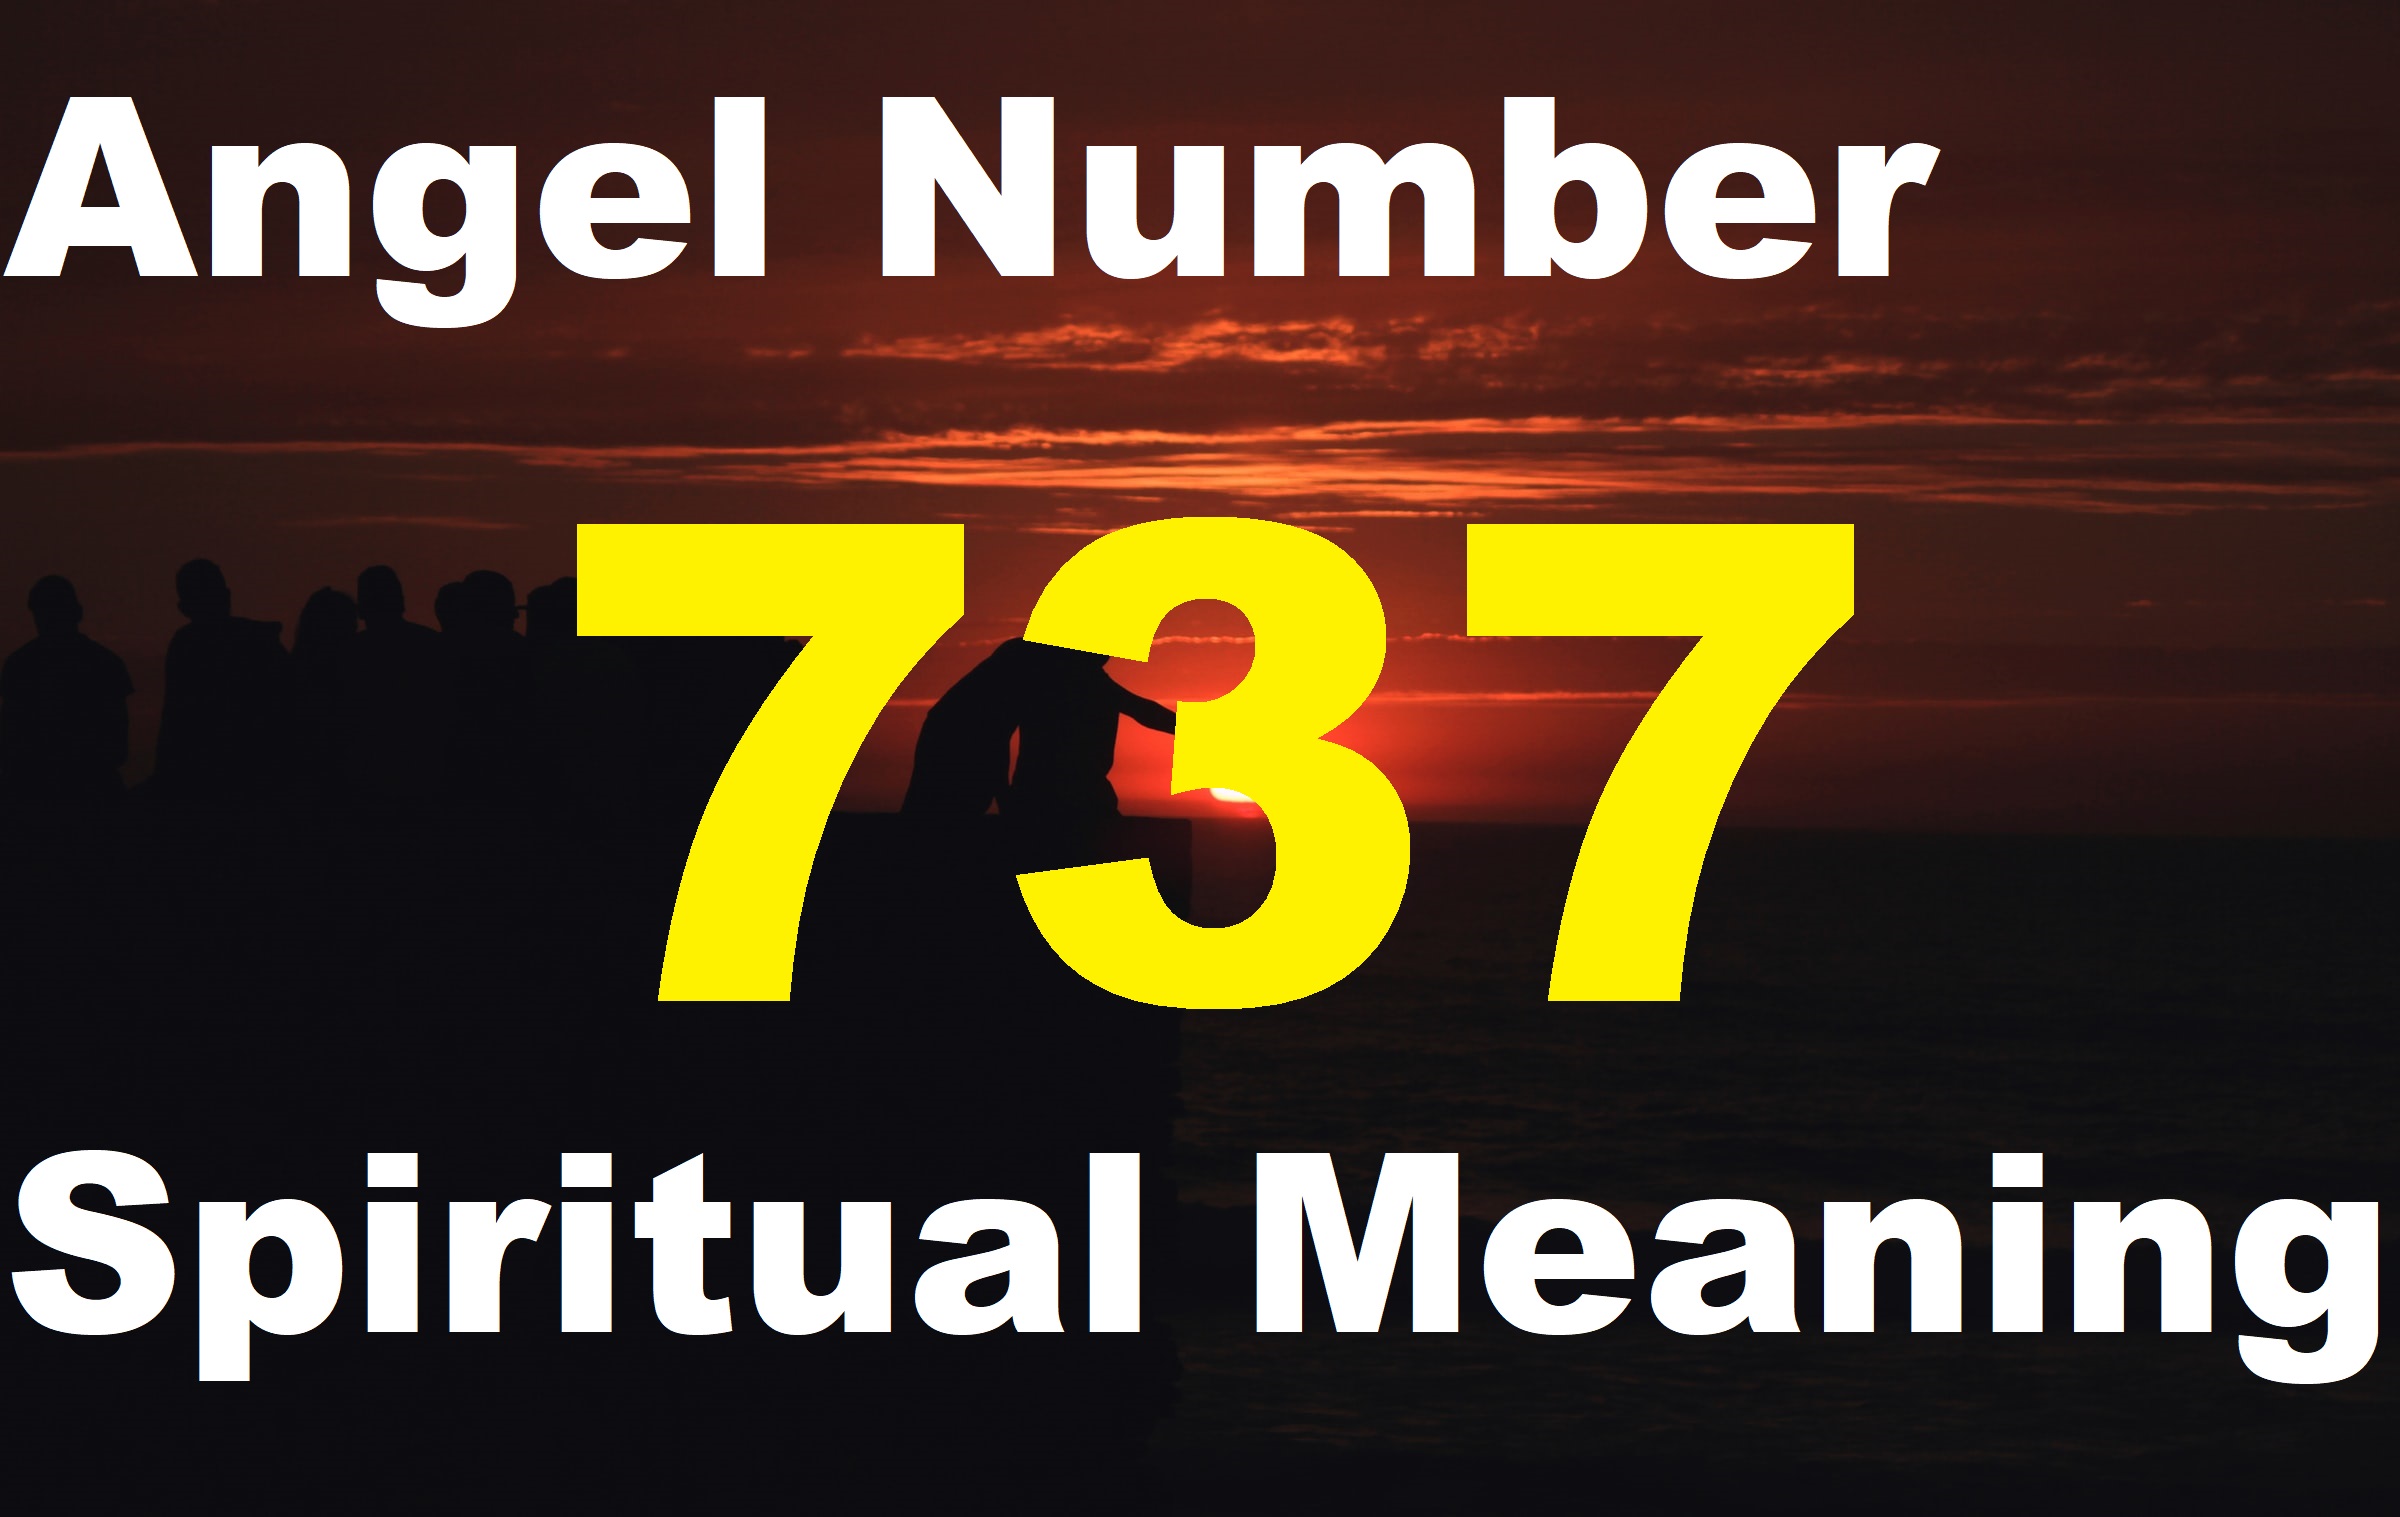 Angel Number 737 Spiritual Meaning with a background of people looking at a sunset